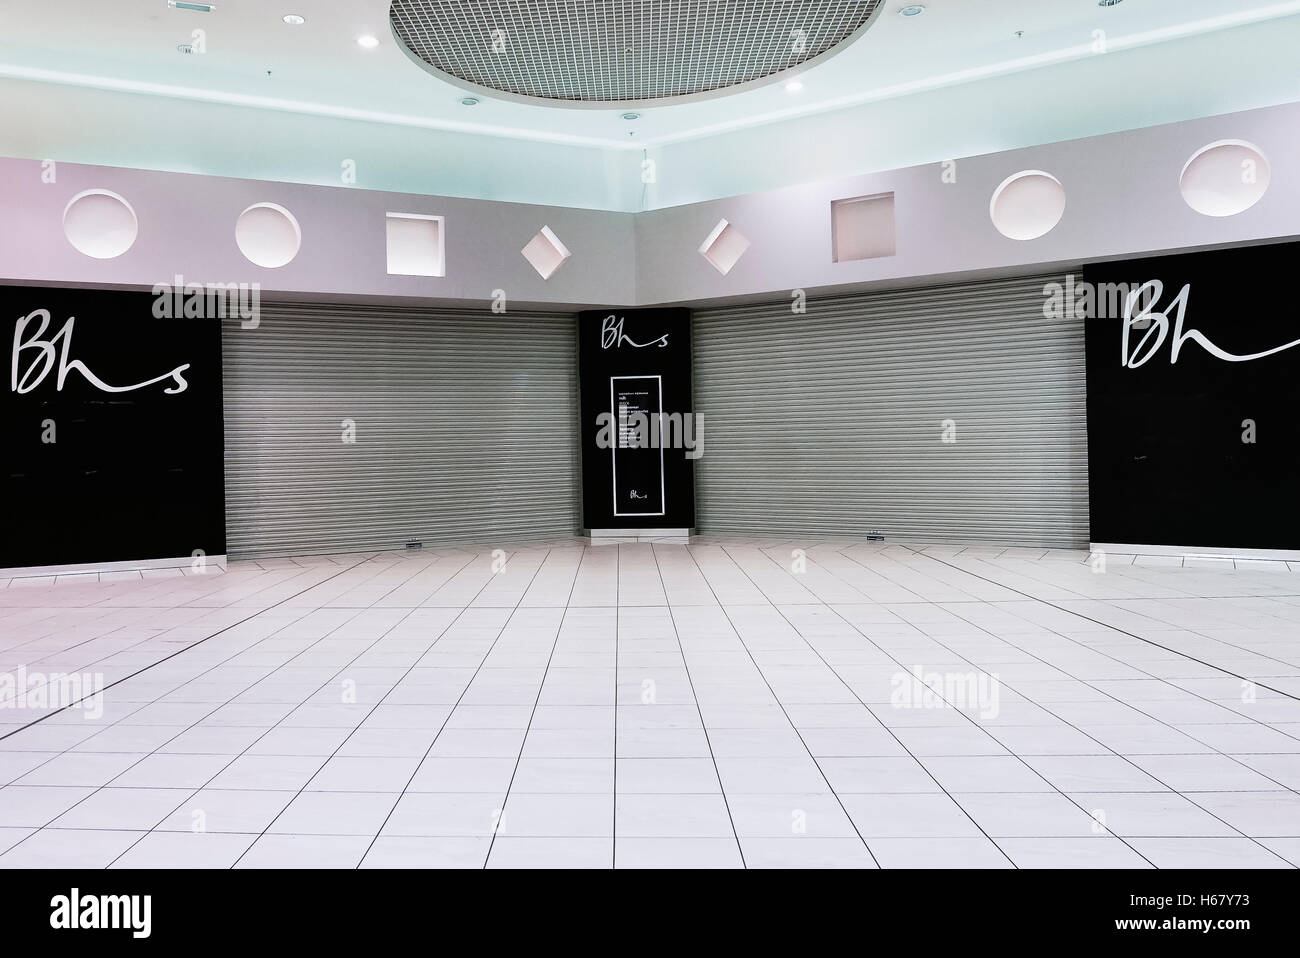 British Home Stores (BHS) in Newtownabbey, which closed in August 2016 following the collapse of the business. Stock Photo